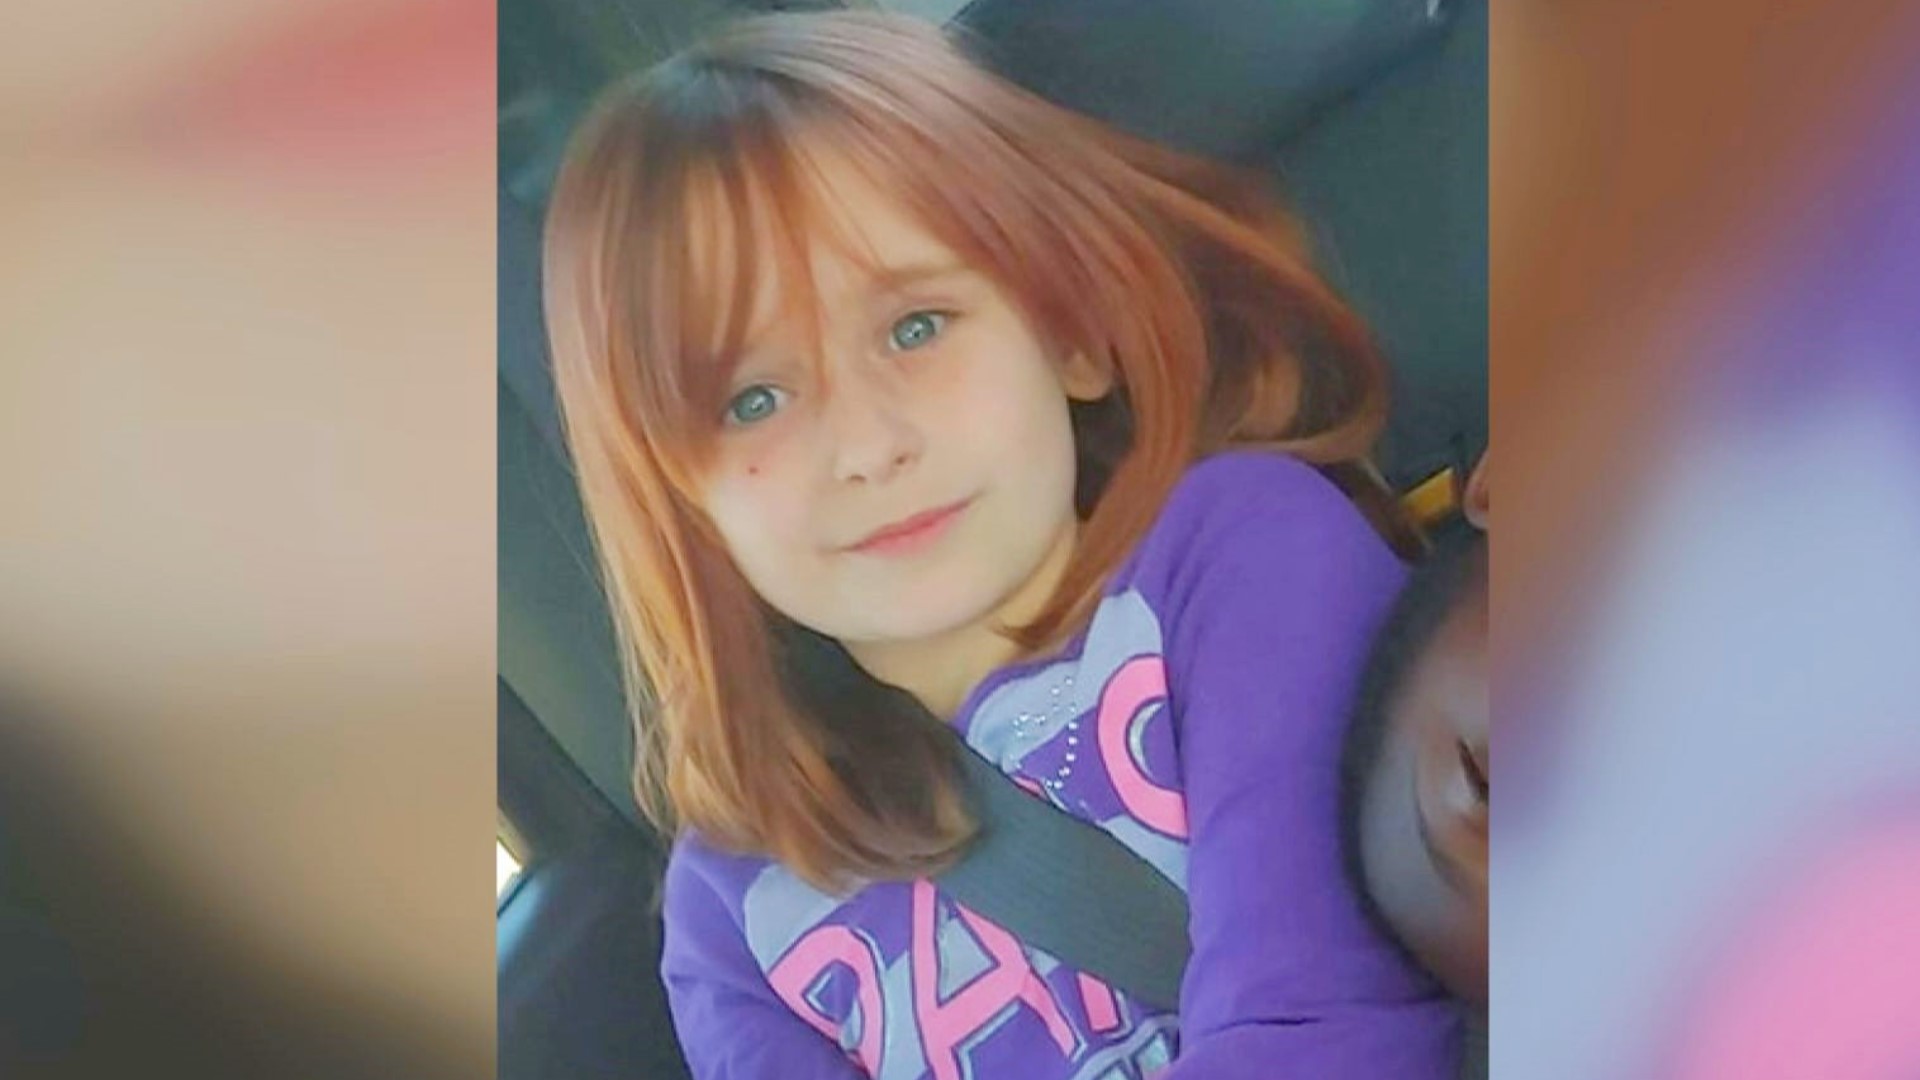 The body of six-year-old Faye Swetlik was found on Thusday after she went missing on Monday. The death is being treated as a homicide.